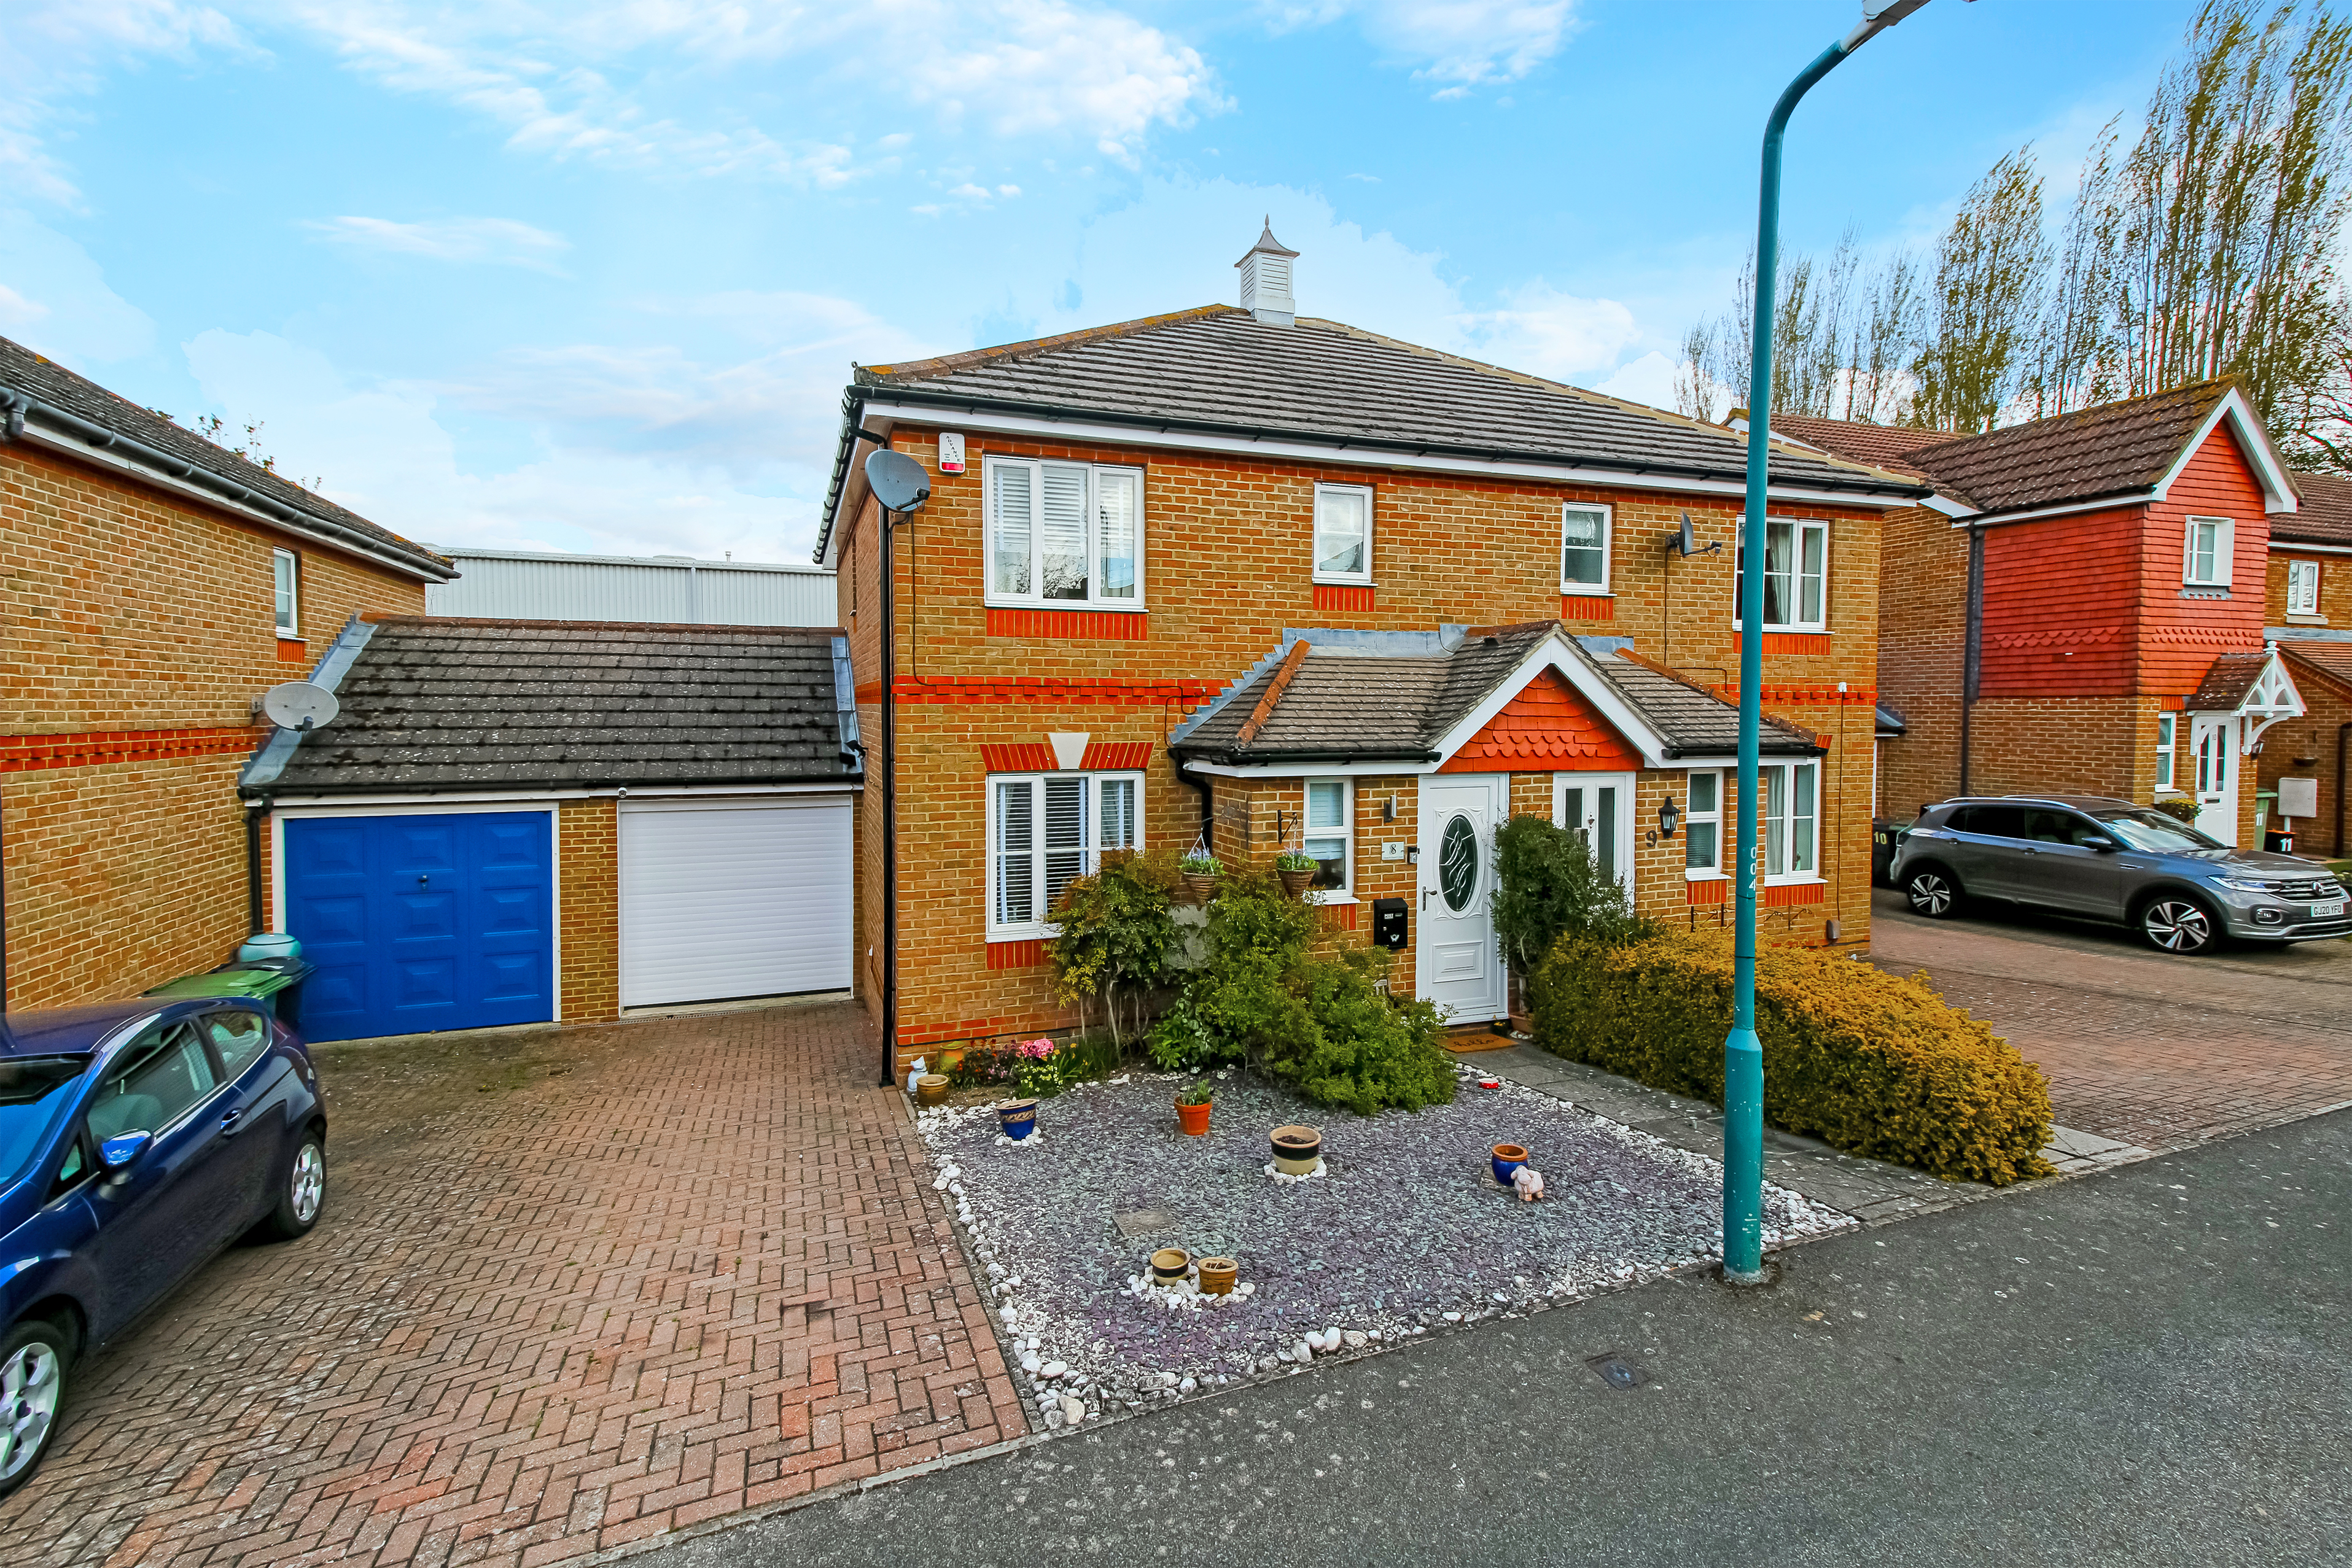 Sold In Your Area; Beech Hurst Court, Maidstone